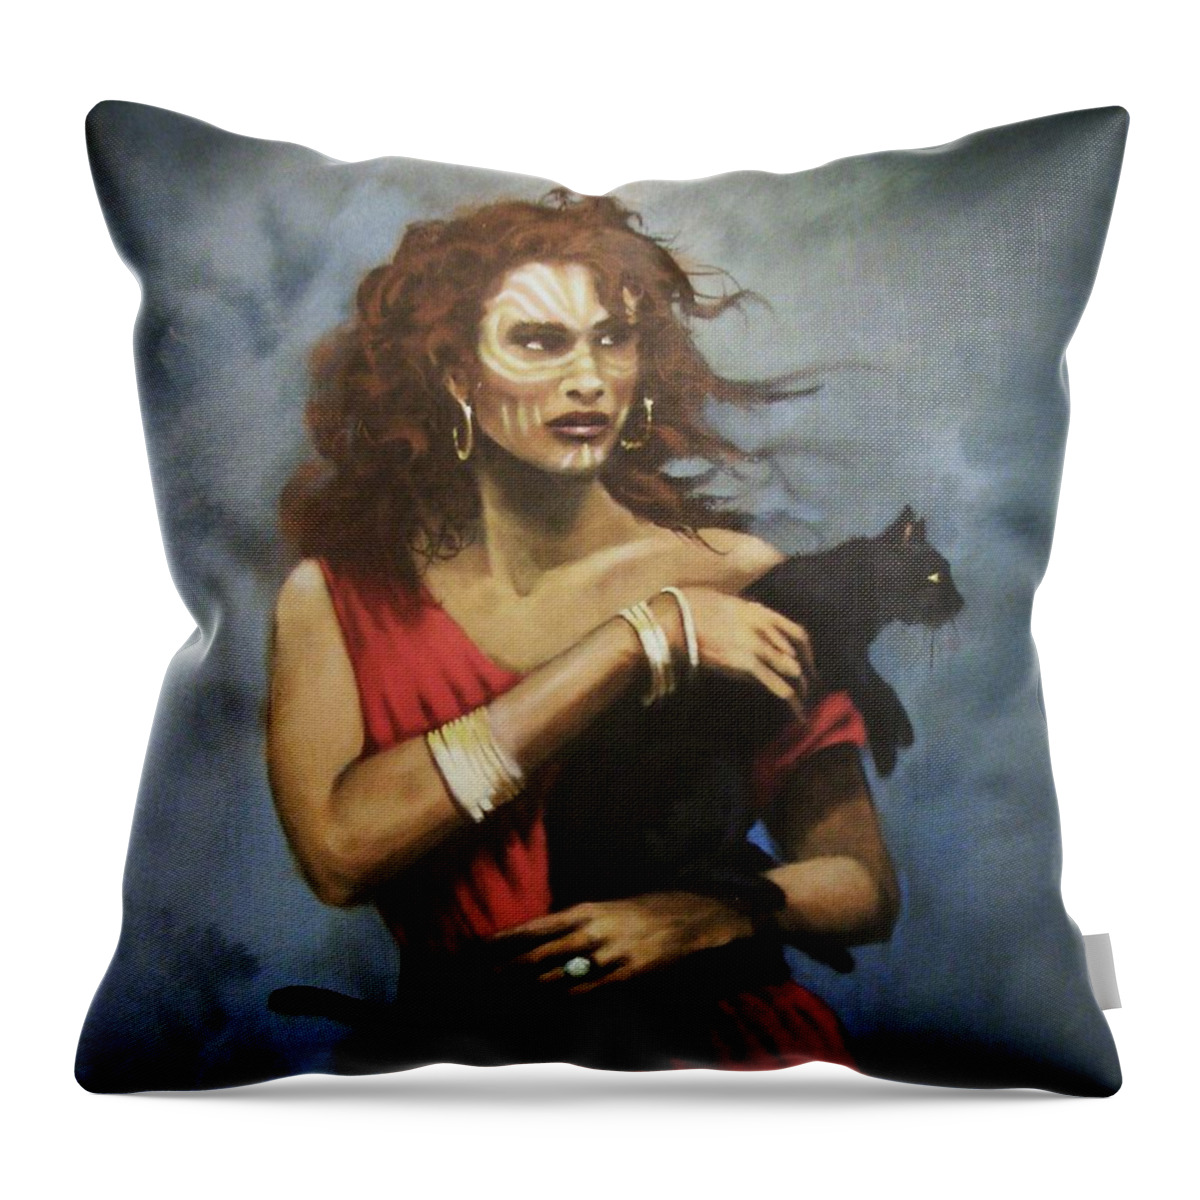 Black Cats Throw Pillow featuring the painting Red Witch by Tom Shropshire